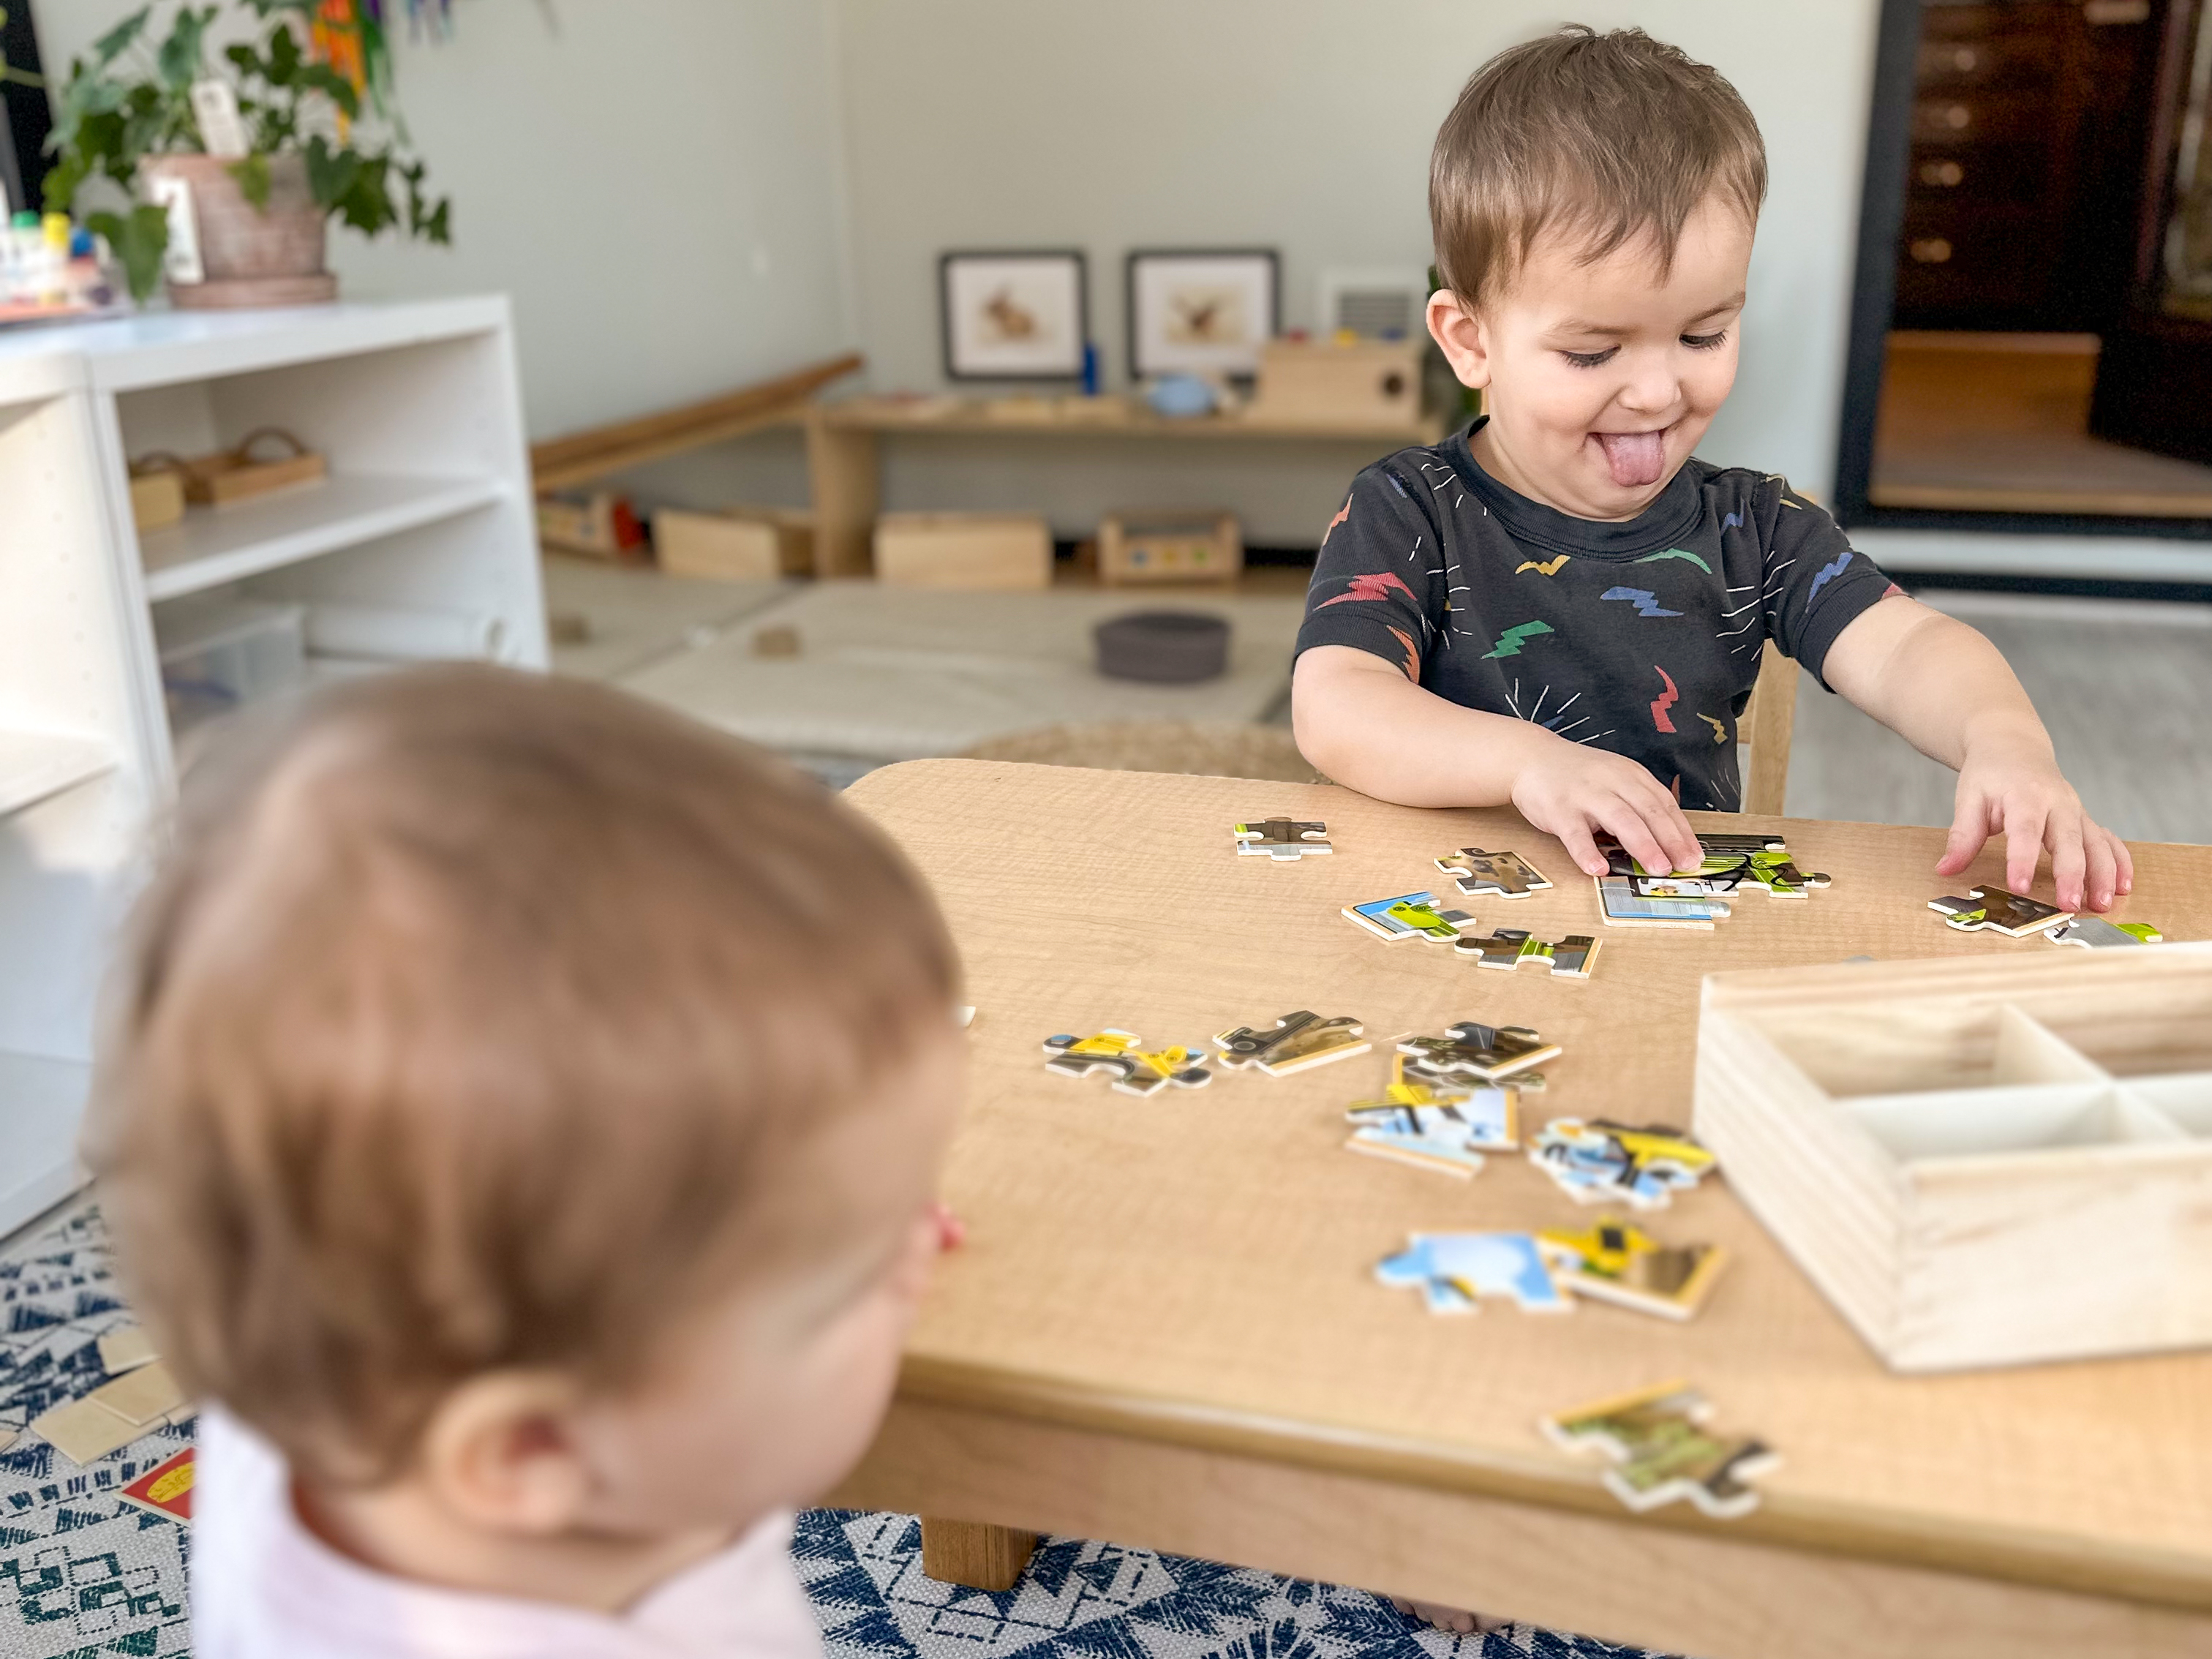 Toddler happily works on jigsaw puzzle at table in Montessori home while baby watches on.